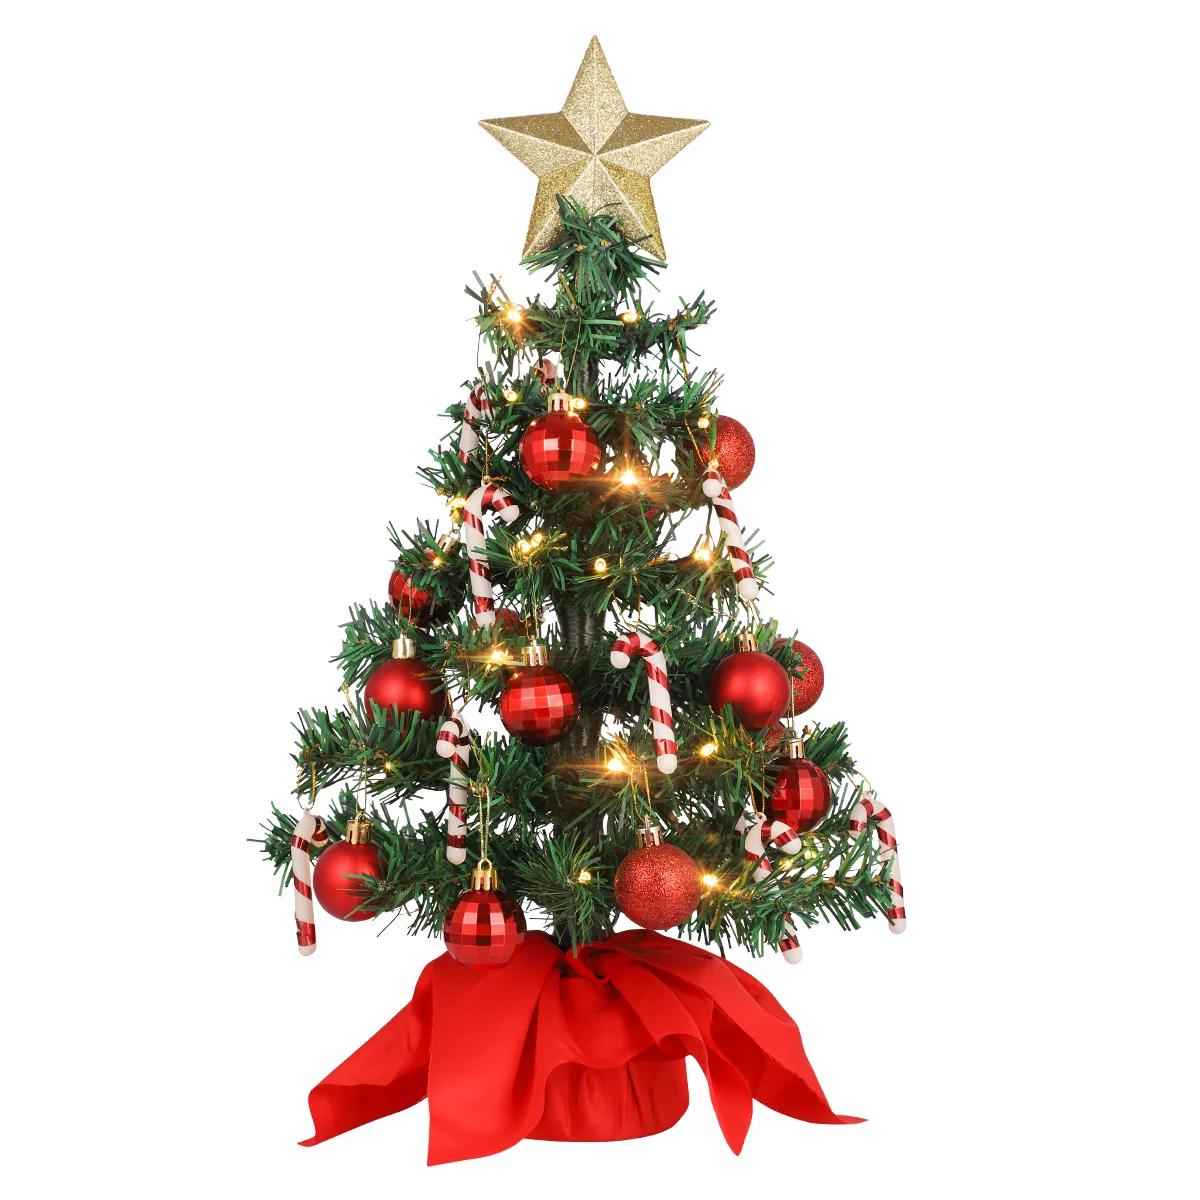 

PRETYZOOM Artificial Desktop Christmas Trees With LED String Light Hanging Ball Ornaments Xmas Party Christmas Decor With Lights